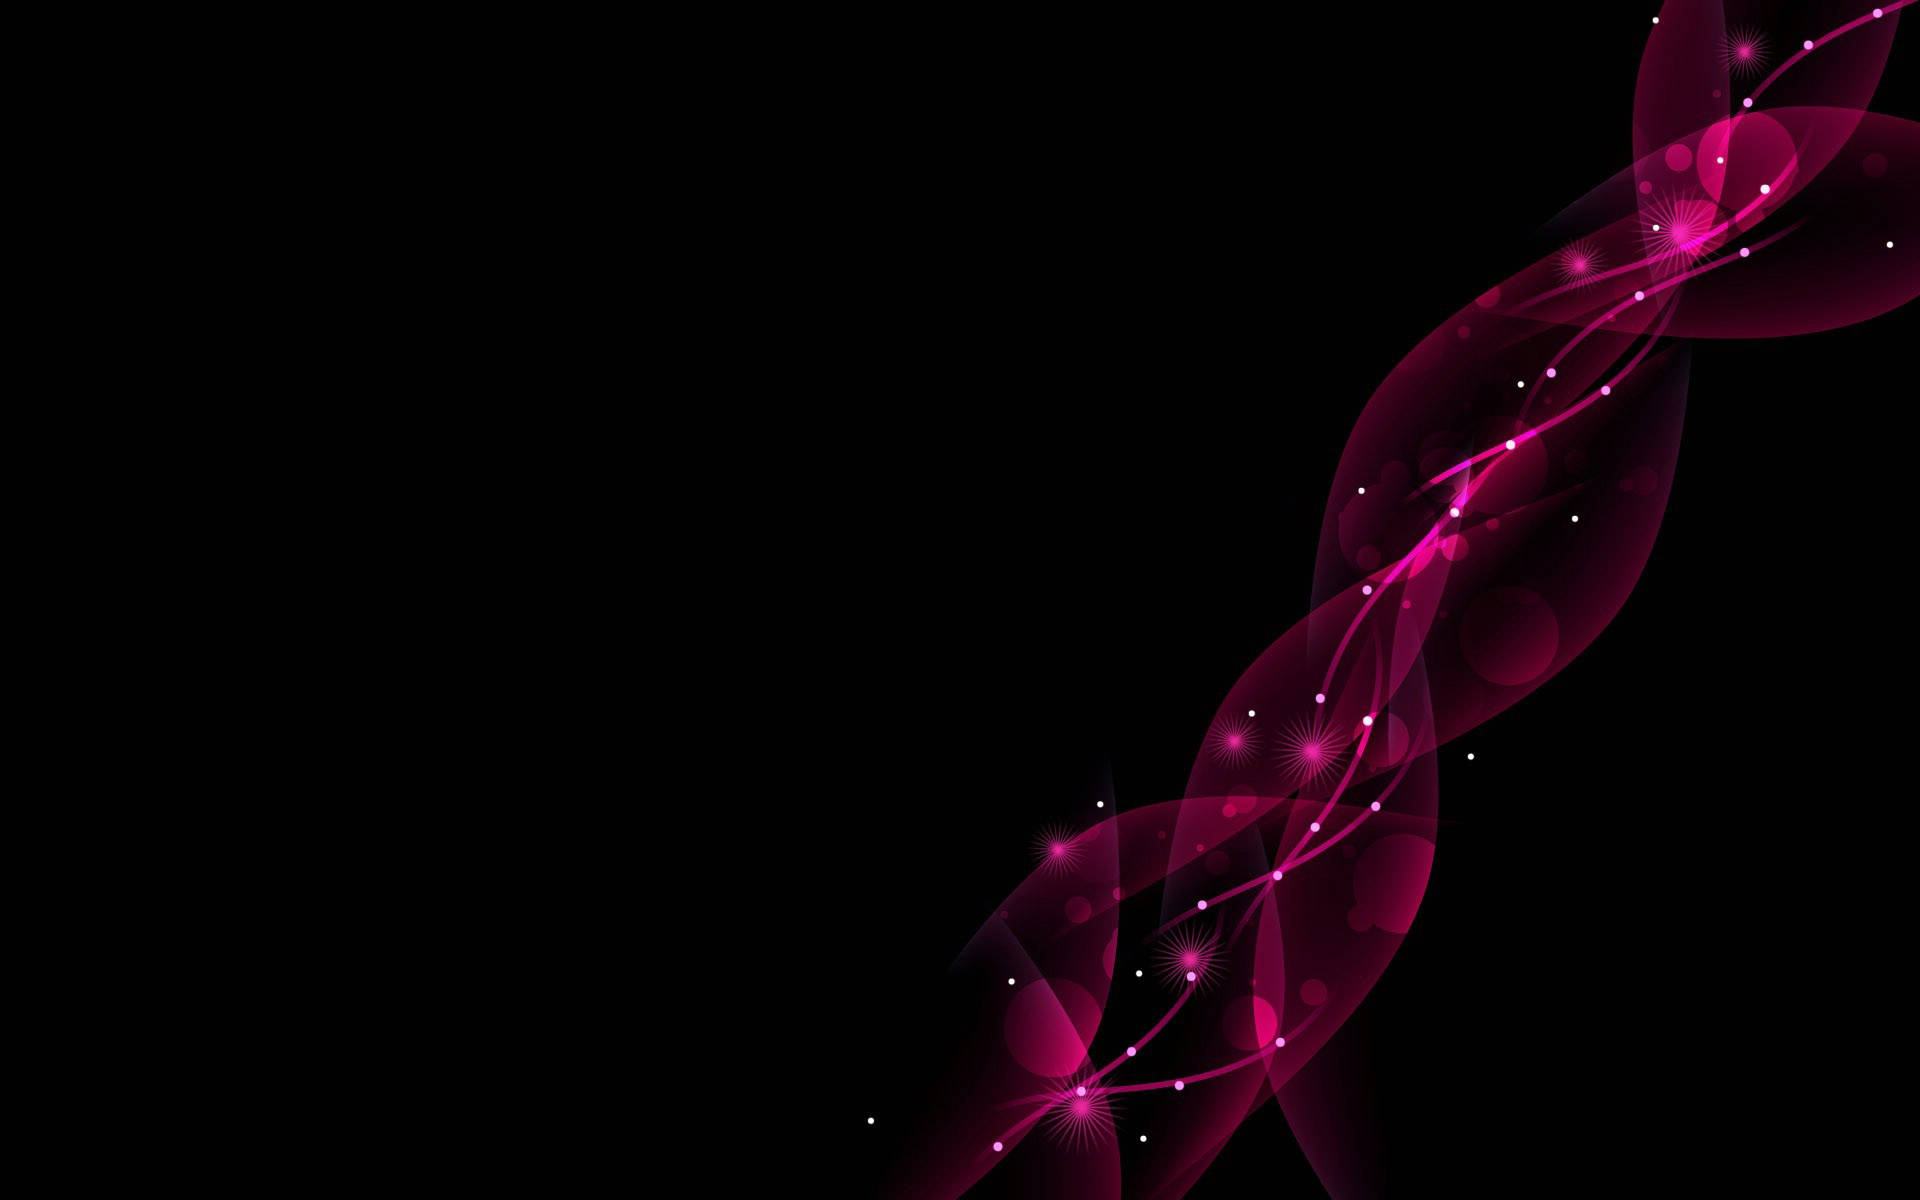 Black And Pink Aesthetic Wavy Fractal